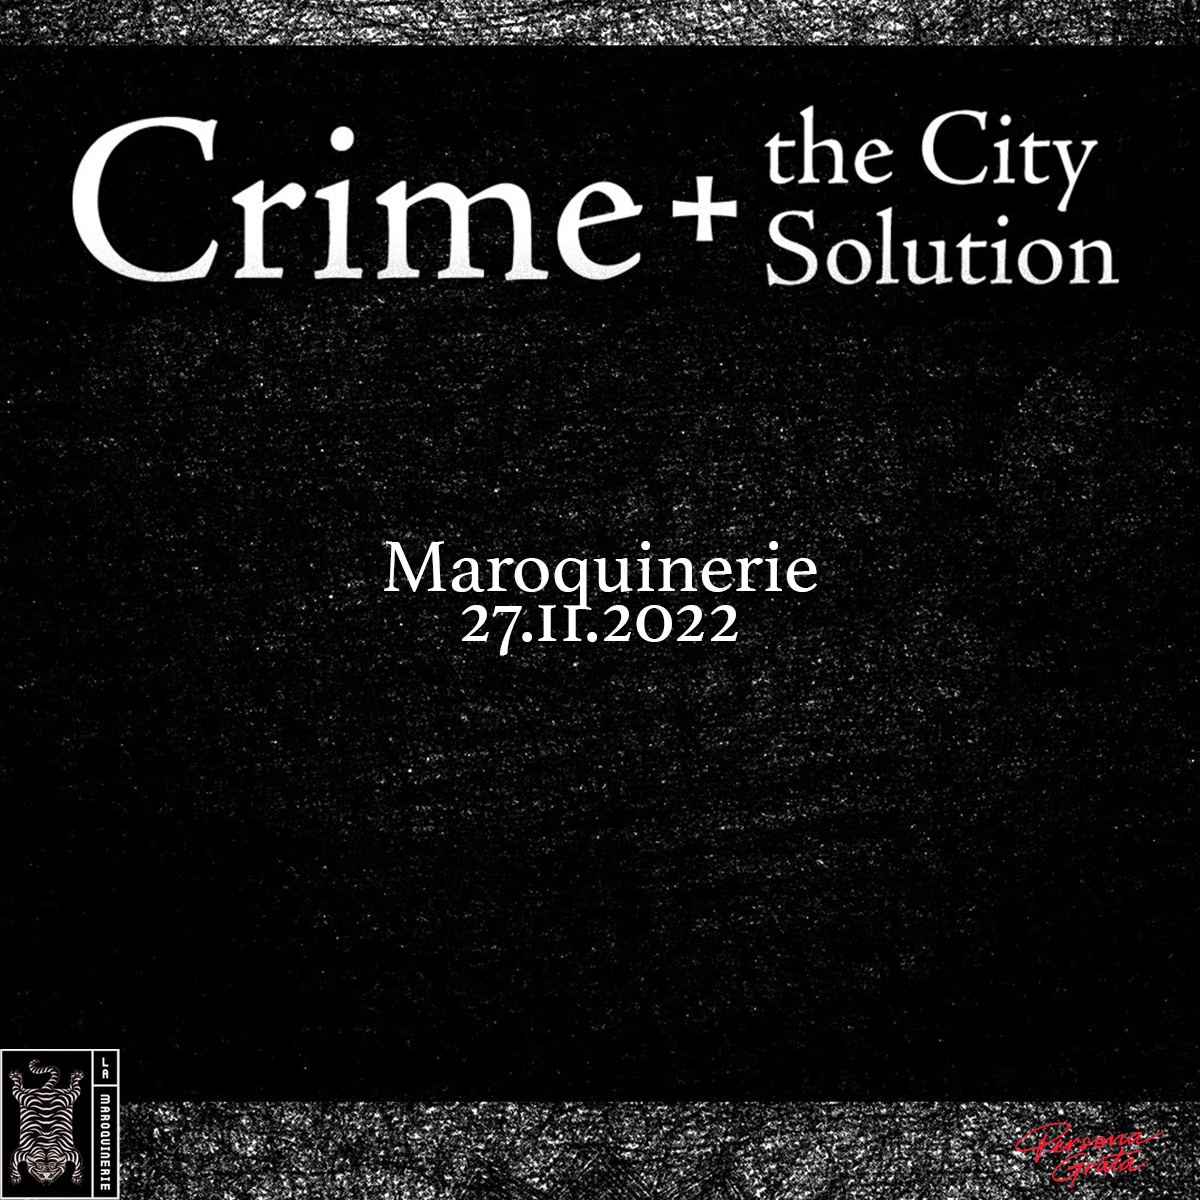 CRIME AND THE CITY SOLUTION